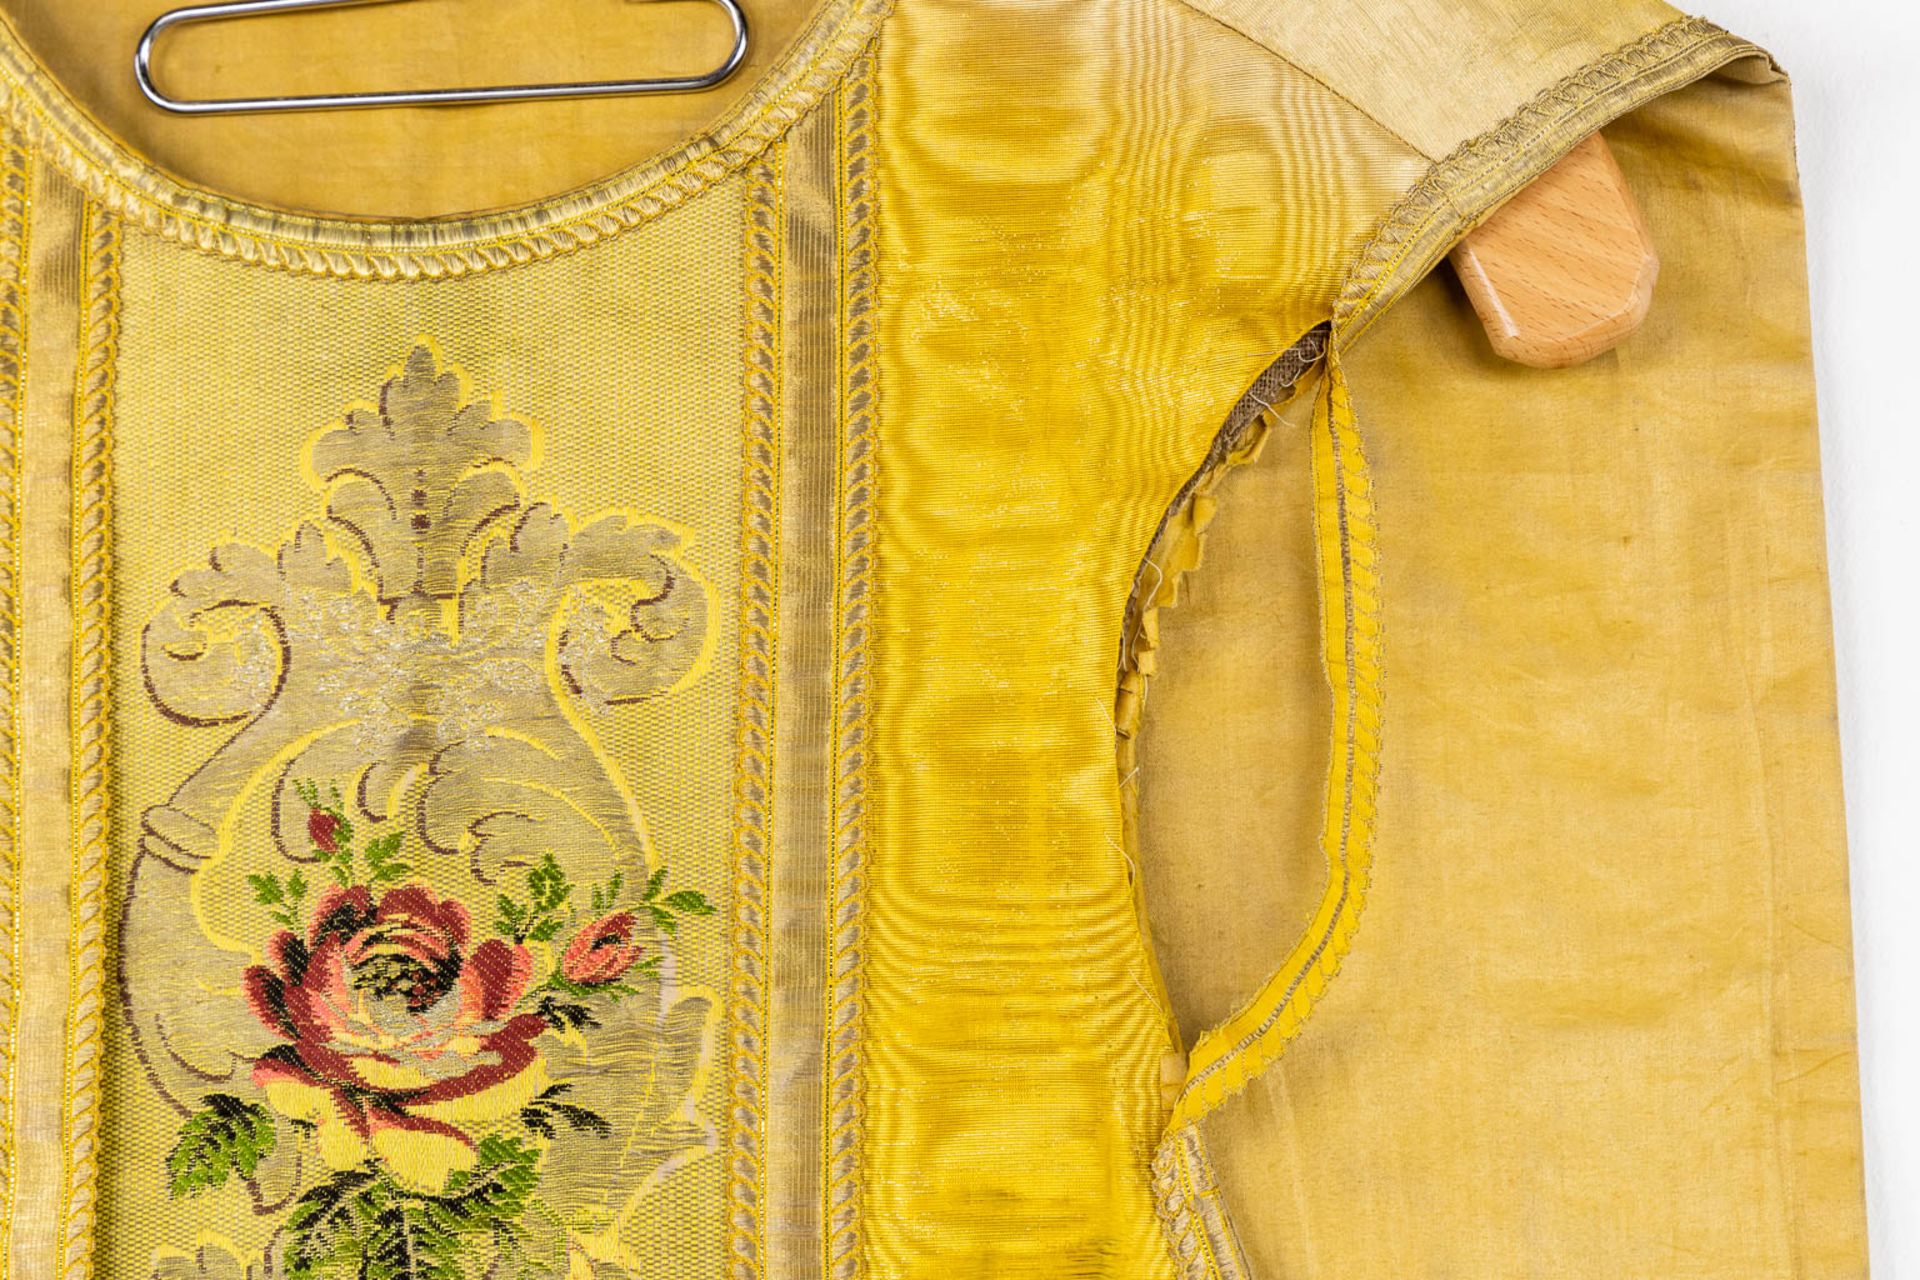 A Humeral Veil and Four Roman Chasubles, embroideries with an IHS and floral decor. - Image 16 of 29